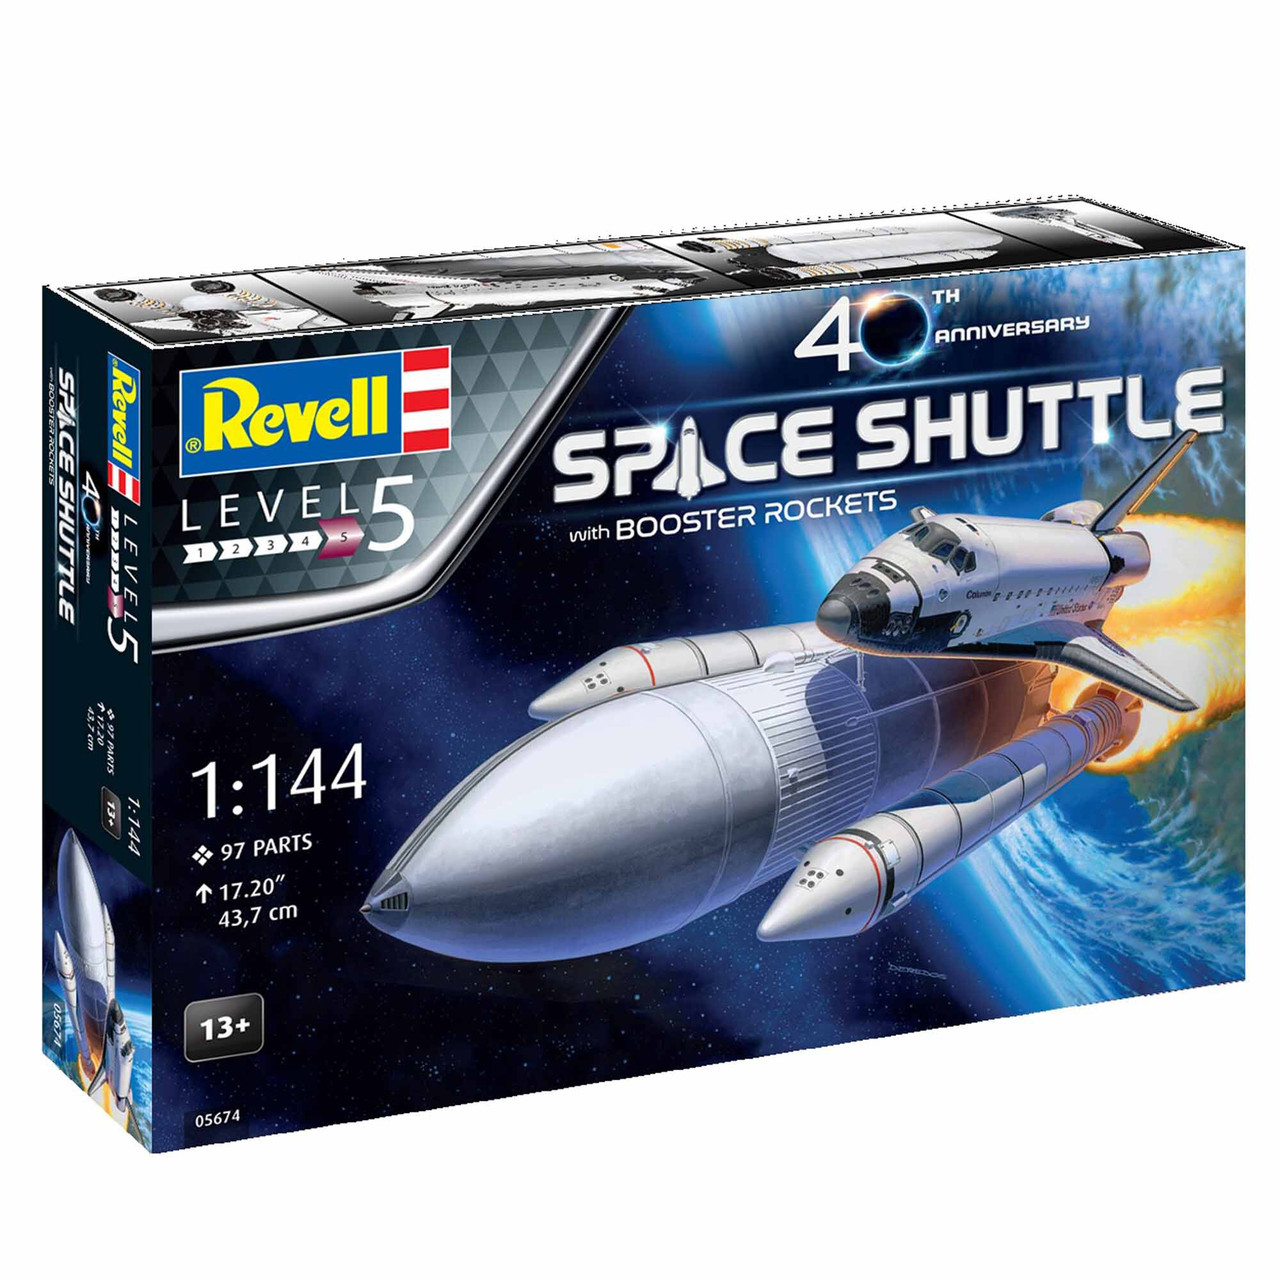 1/144 Space Shuttle with Booster Rockets 40th Anniversary - 80567400003